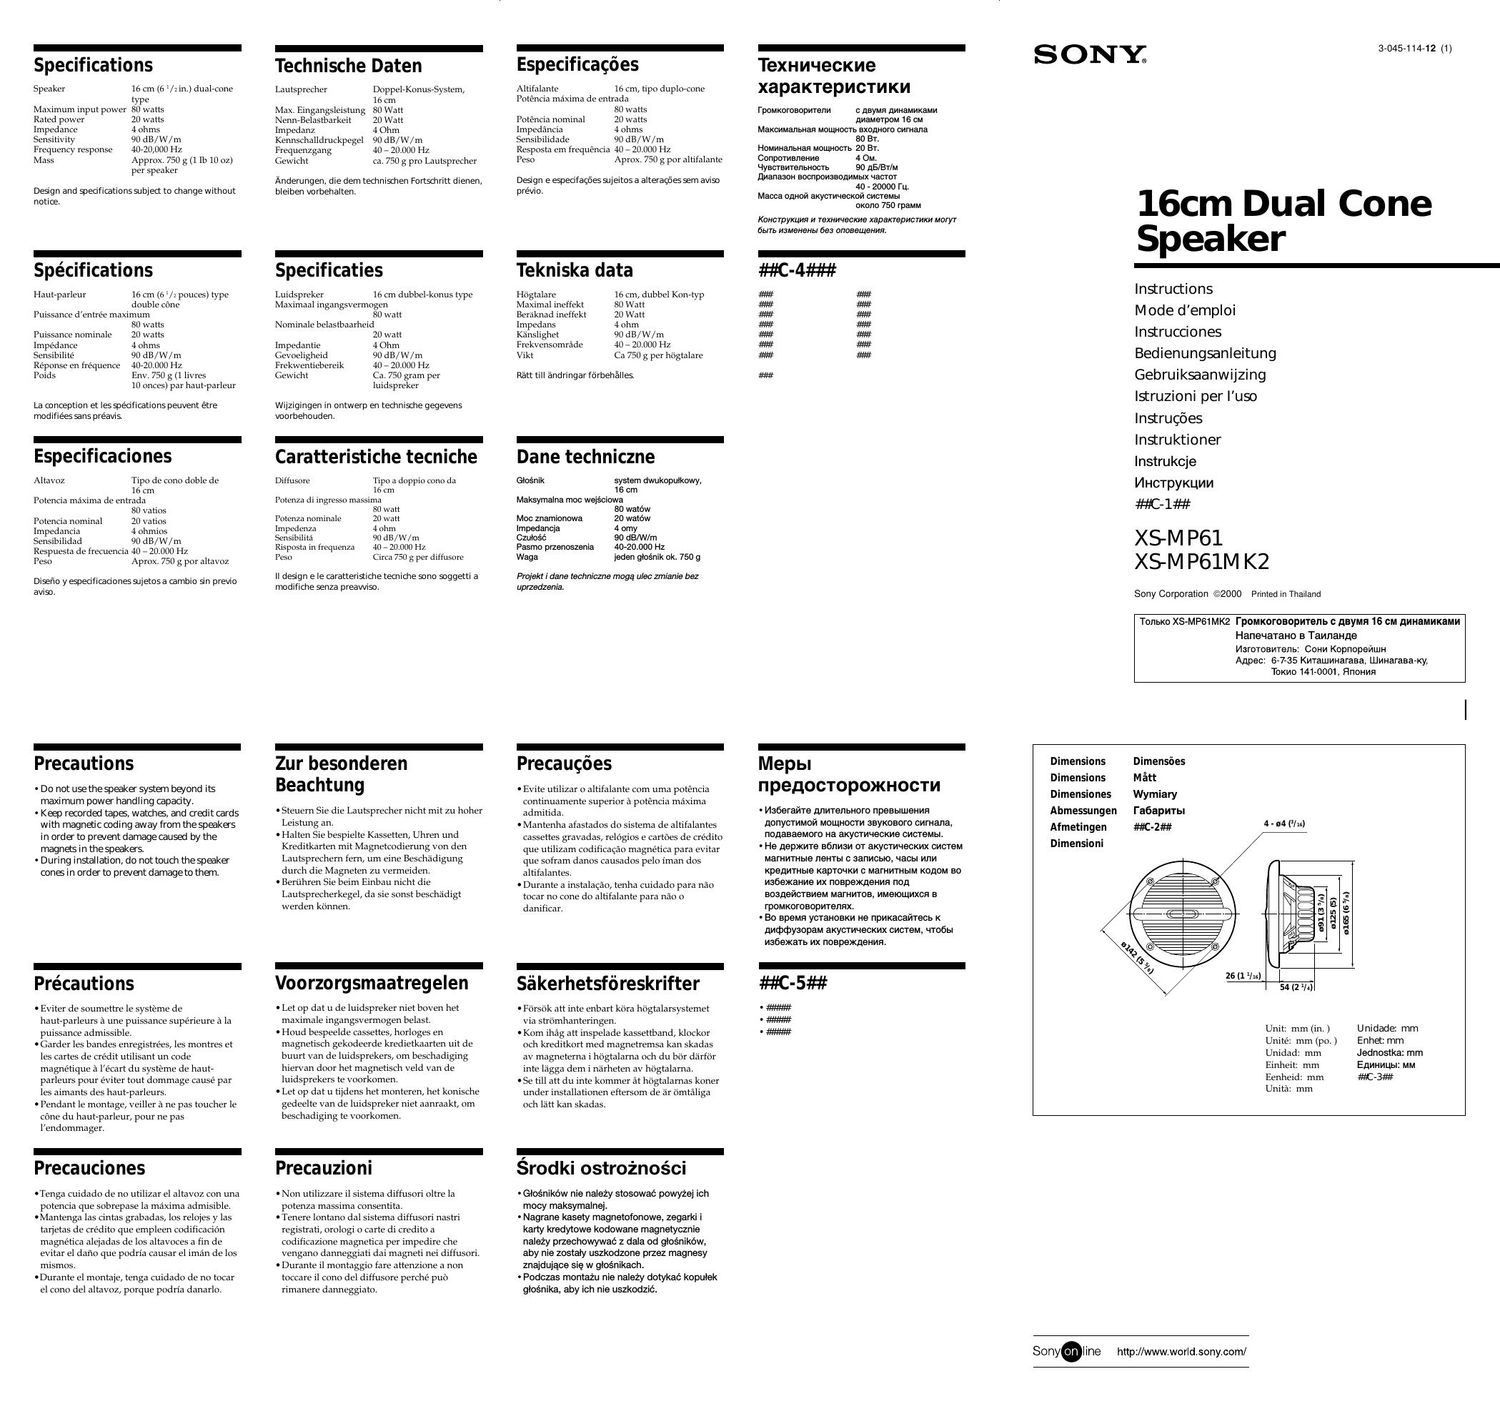 sony xs mp 61 owners manual